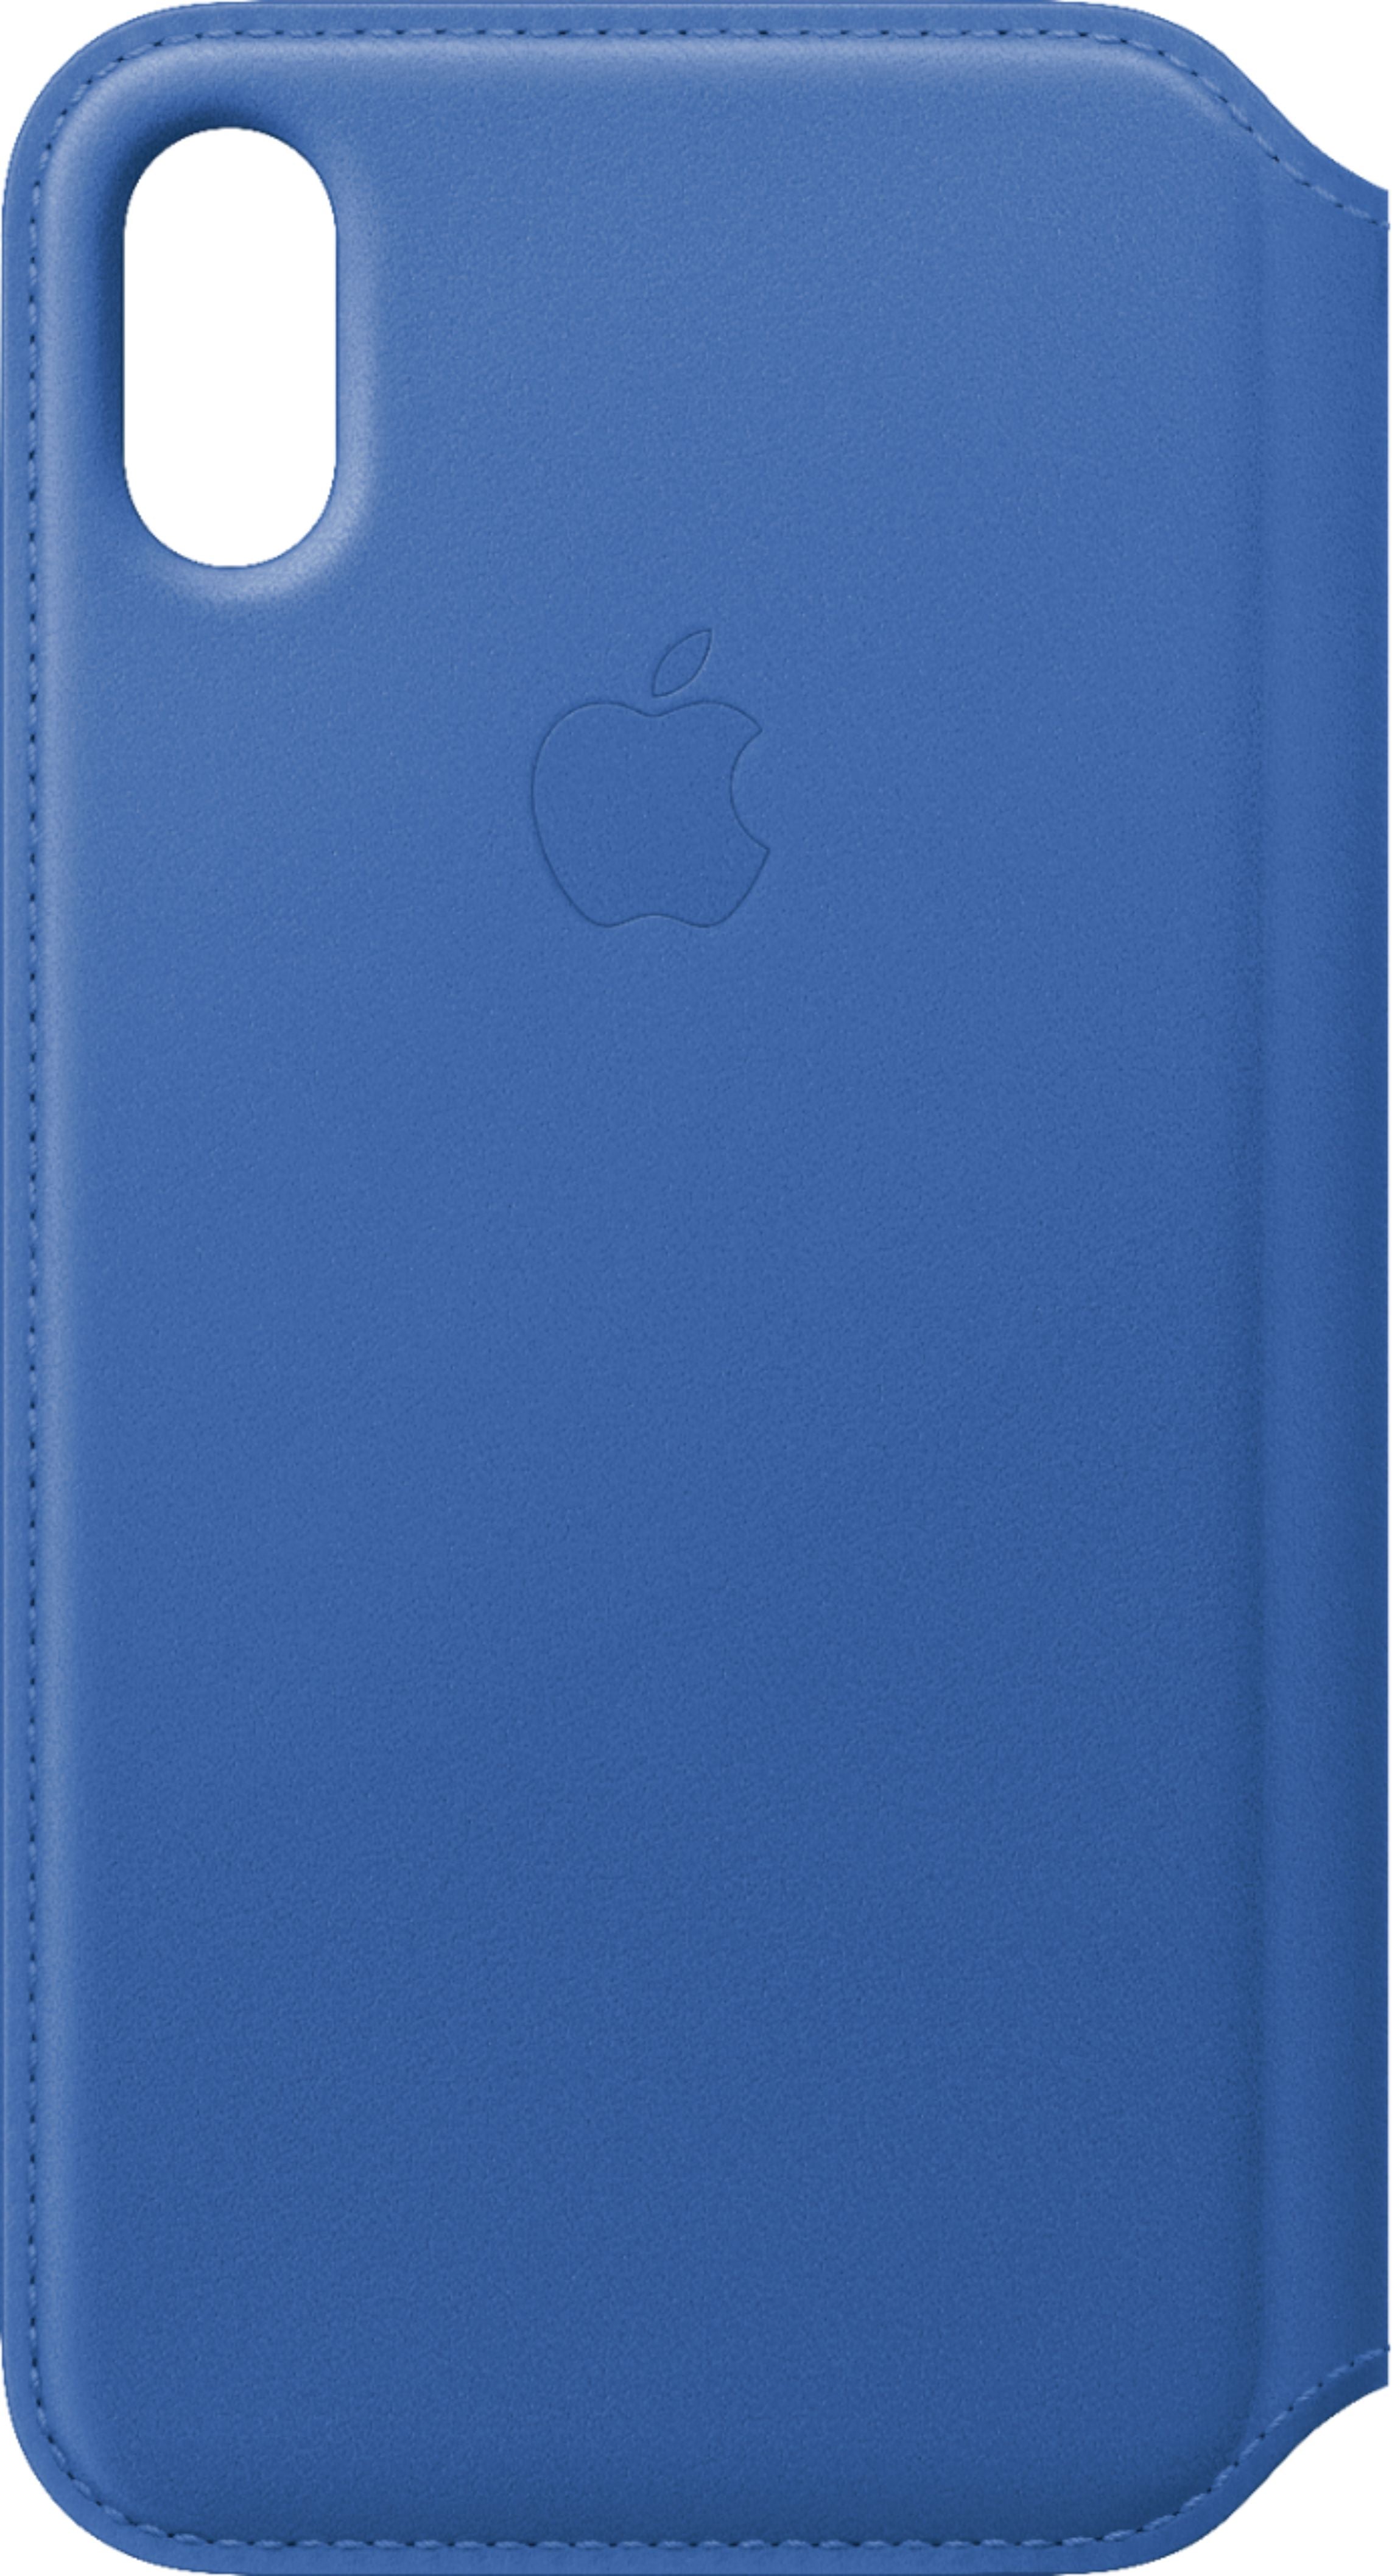 Apple Leather Folio (for iPhone X) - Electric Blue